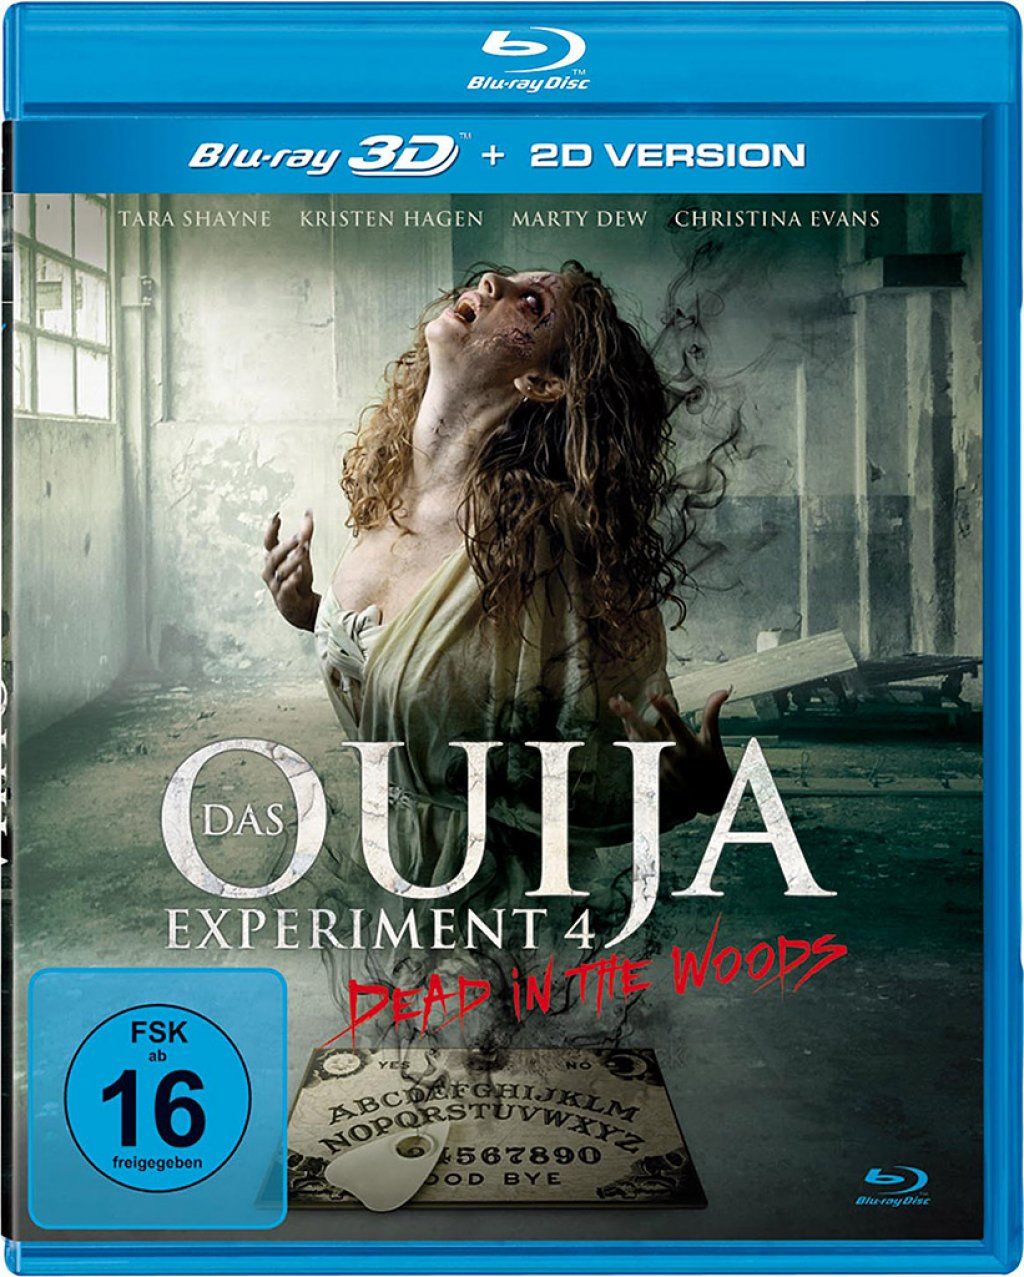 Ouija Experiment 4 3D, Das - Dead in the Woods (BLURAY 3D)